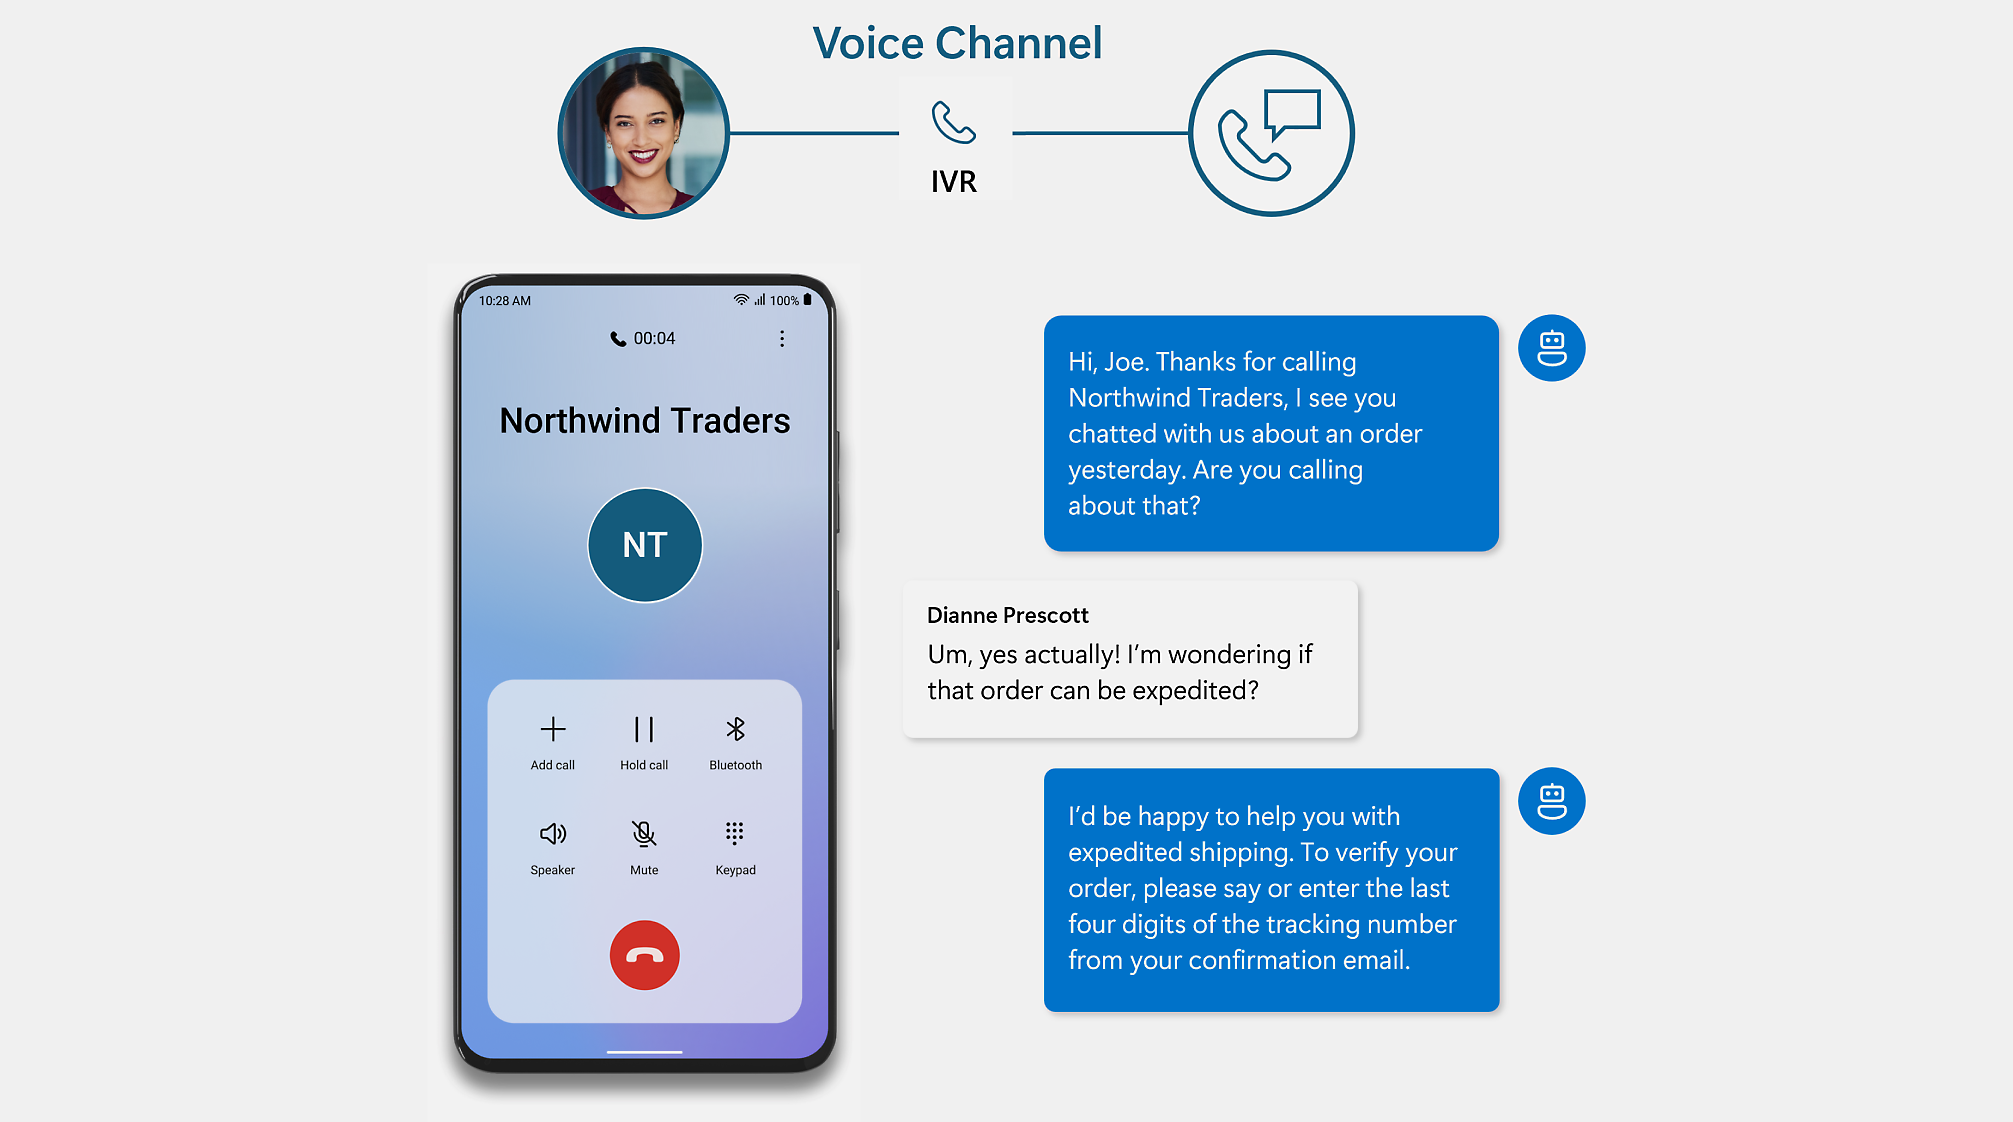 Phone screen showing a call with Northwind Traders discussing order expediting with a customer service representative's image